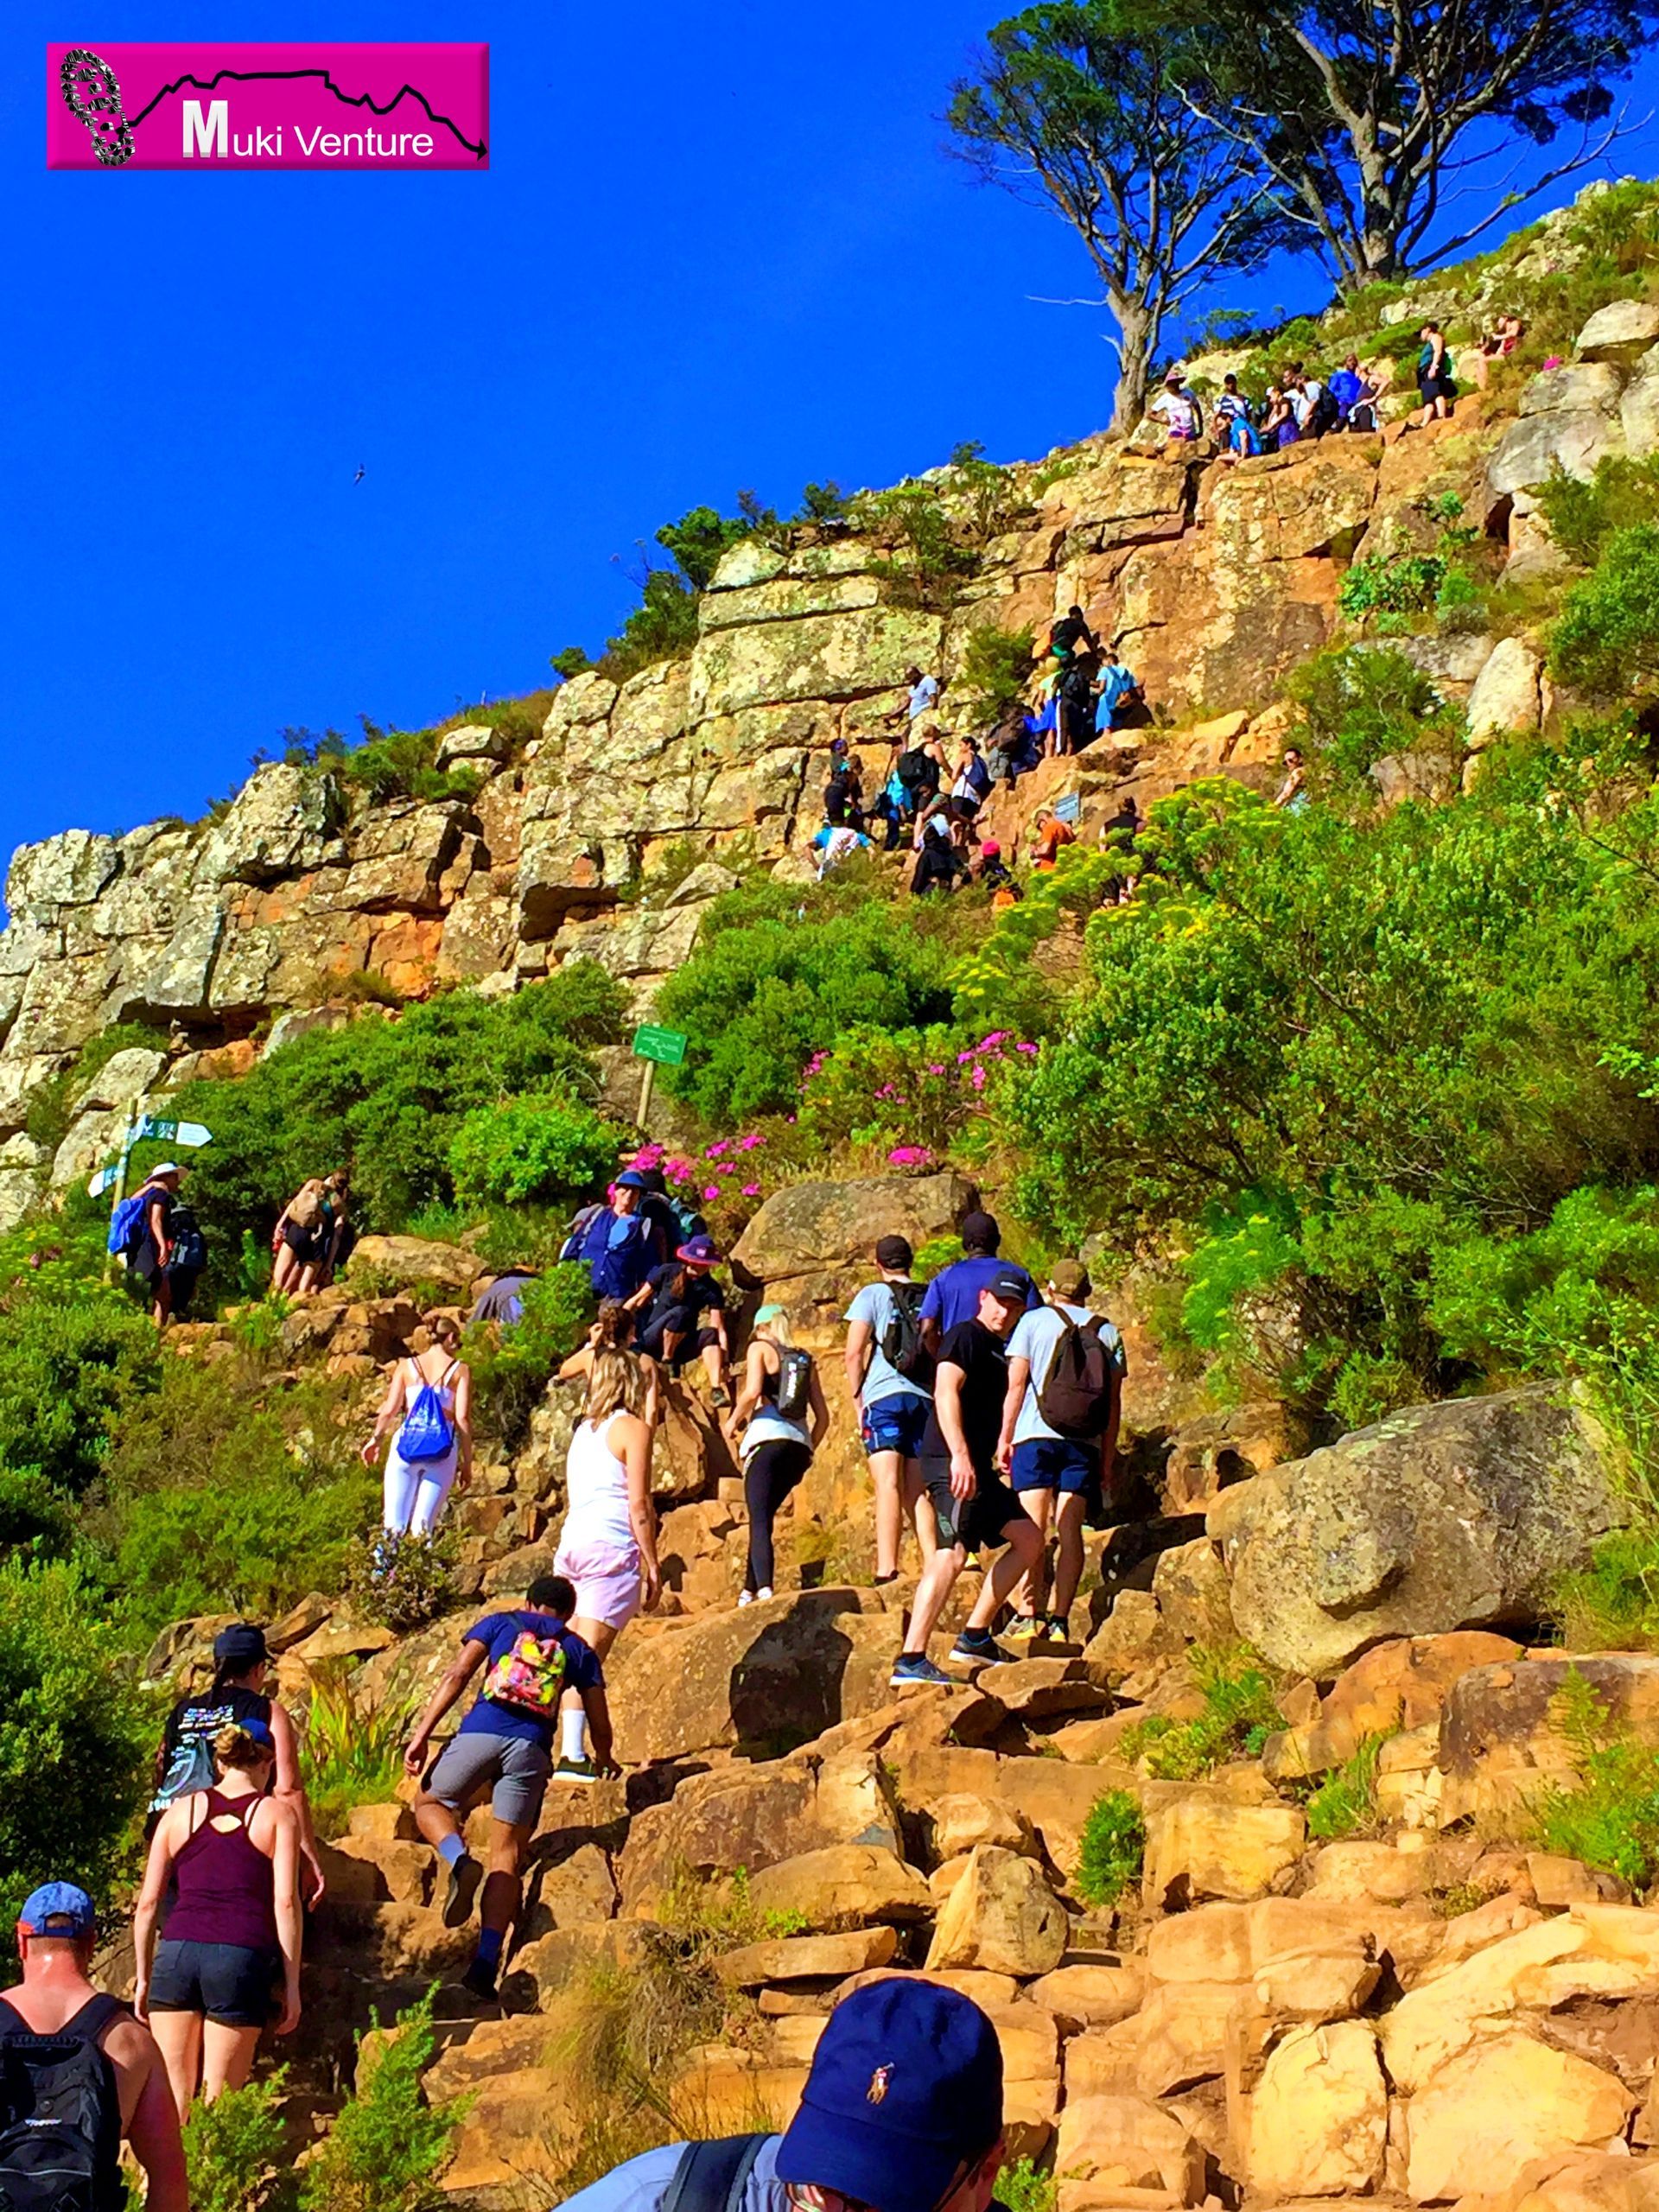 The Table Mountain and Lions Head Guided Tour by Muki Venture is the ultimate adventure for nature enthusiasts and outdoor adventurers. This exciting tour takes you on a thrilling journey to two iconic landmarks in Cape Town, South Africa - Table Mountain and Lions Head.  The tour begins with a knowledgeable and experienced guide who will accompany you throughout the day and provide insightful commentary on the history, geology, and flora/fauna of the region. You will start by conquering Lions Head, a prominent peak offering breathtaking panoramic views of the city, Atlantic Ocean, and surrounding landscape. As you ascend the mountain, you will be amazed by the stunning scenery and unique rock formations.  After the exhilarating hike up Lions Head, you will be treated to a well-deserved break for refreshments and snacks. Take a moment to relax and soak in the awe-inspiring views before continuing your adventure to Table Mountain.  Next, you will board a cable car that will transport you to the summit of Table Mountain, one of the New Seven Wonders of Nature. At the top, you will have the opportunity to explore the diverse ecosystems, hike along various trails, and marvel at the expansive views of Cape Town and its surroundings.  Throughout the tour, your guide will share interesting facts and stories, ensuring a memorable and educational experience. Whether you are a seasoned hiker or a first-time explorer, the Table Mountain and Lions Head Guided Tour by Muki Venture promises to be an unforgettable adventure filled with natural beauty and exhilarating moments.  Don't miss out on this once-in-a-lifetime opportunity to discover these iconic landmarks in Cape Town. Book your guided tour with Muki Venture and get ready to experience the beauty and grandeur of Table Mountain and Lions Head like never before.